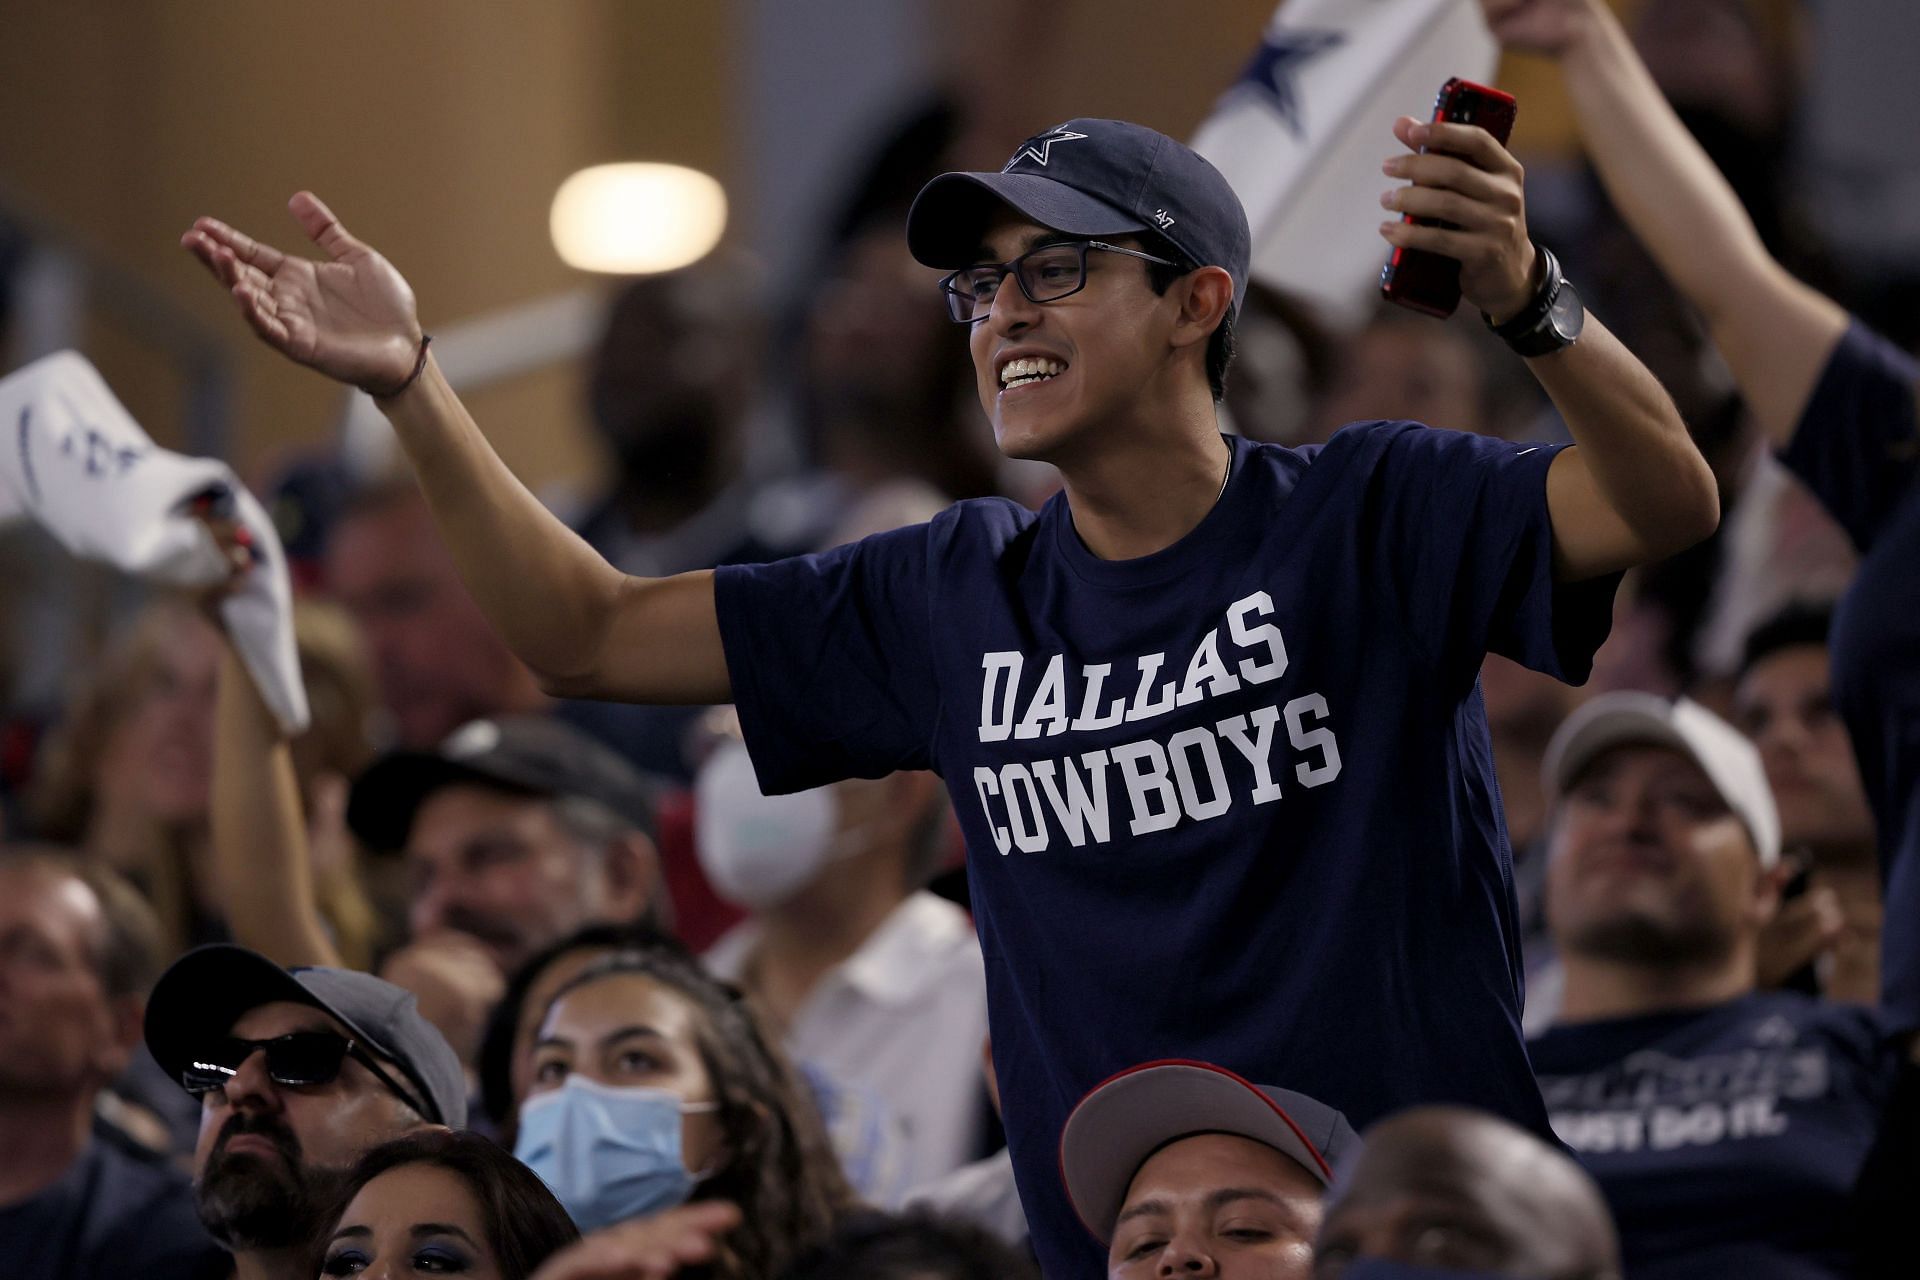 A fan of the Cowboys cheering for the team